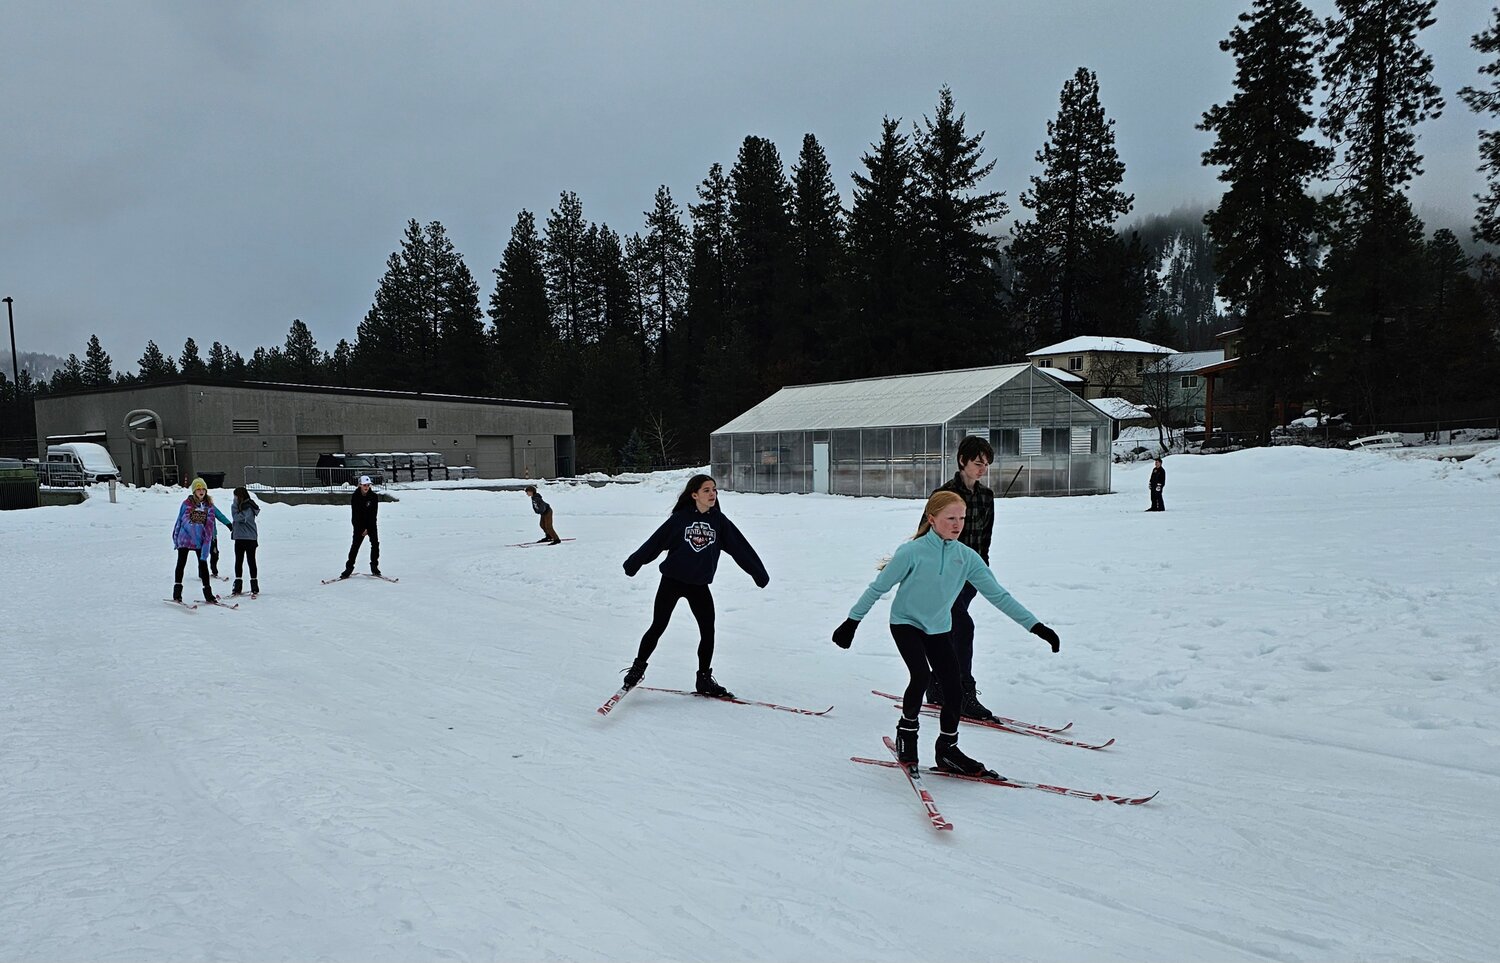 Students ski during their P.E. class on a ski track groomed by Leavenworth Winter Sports Club.